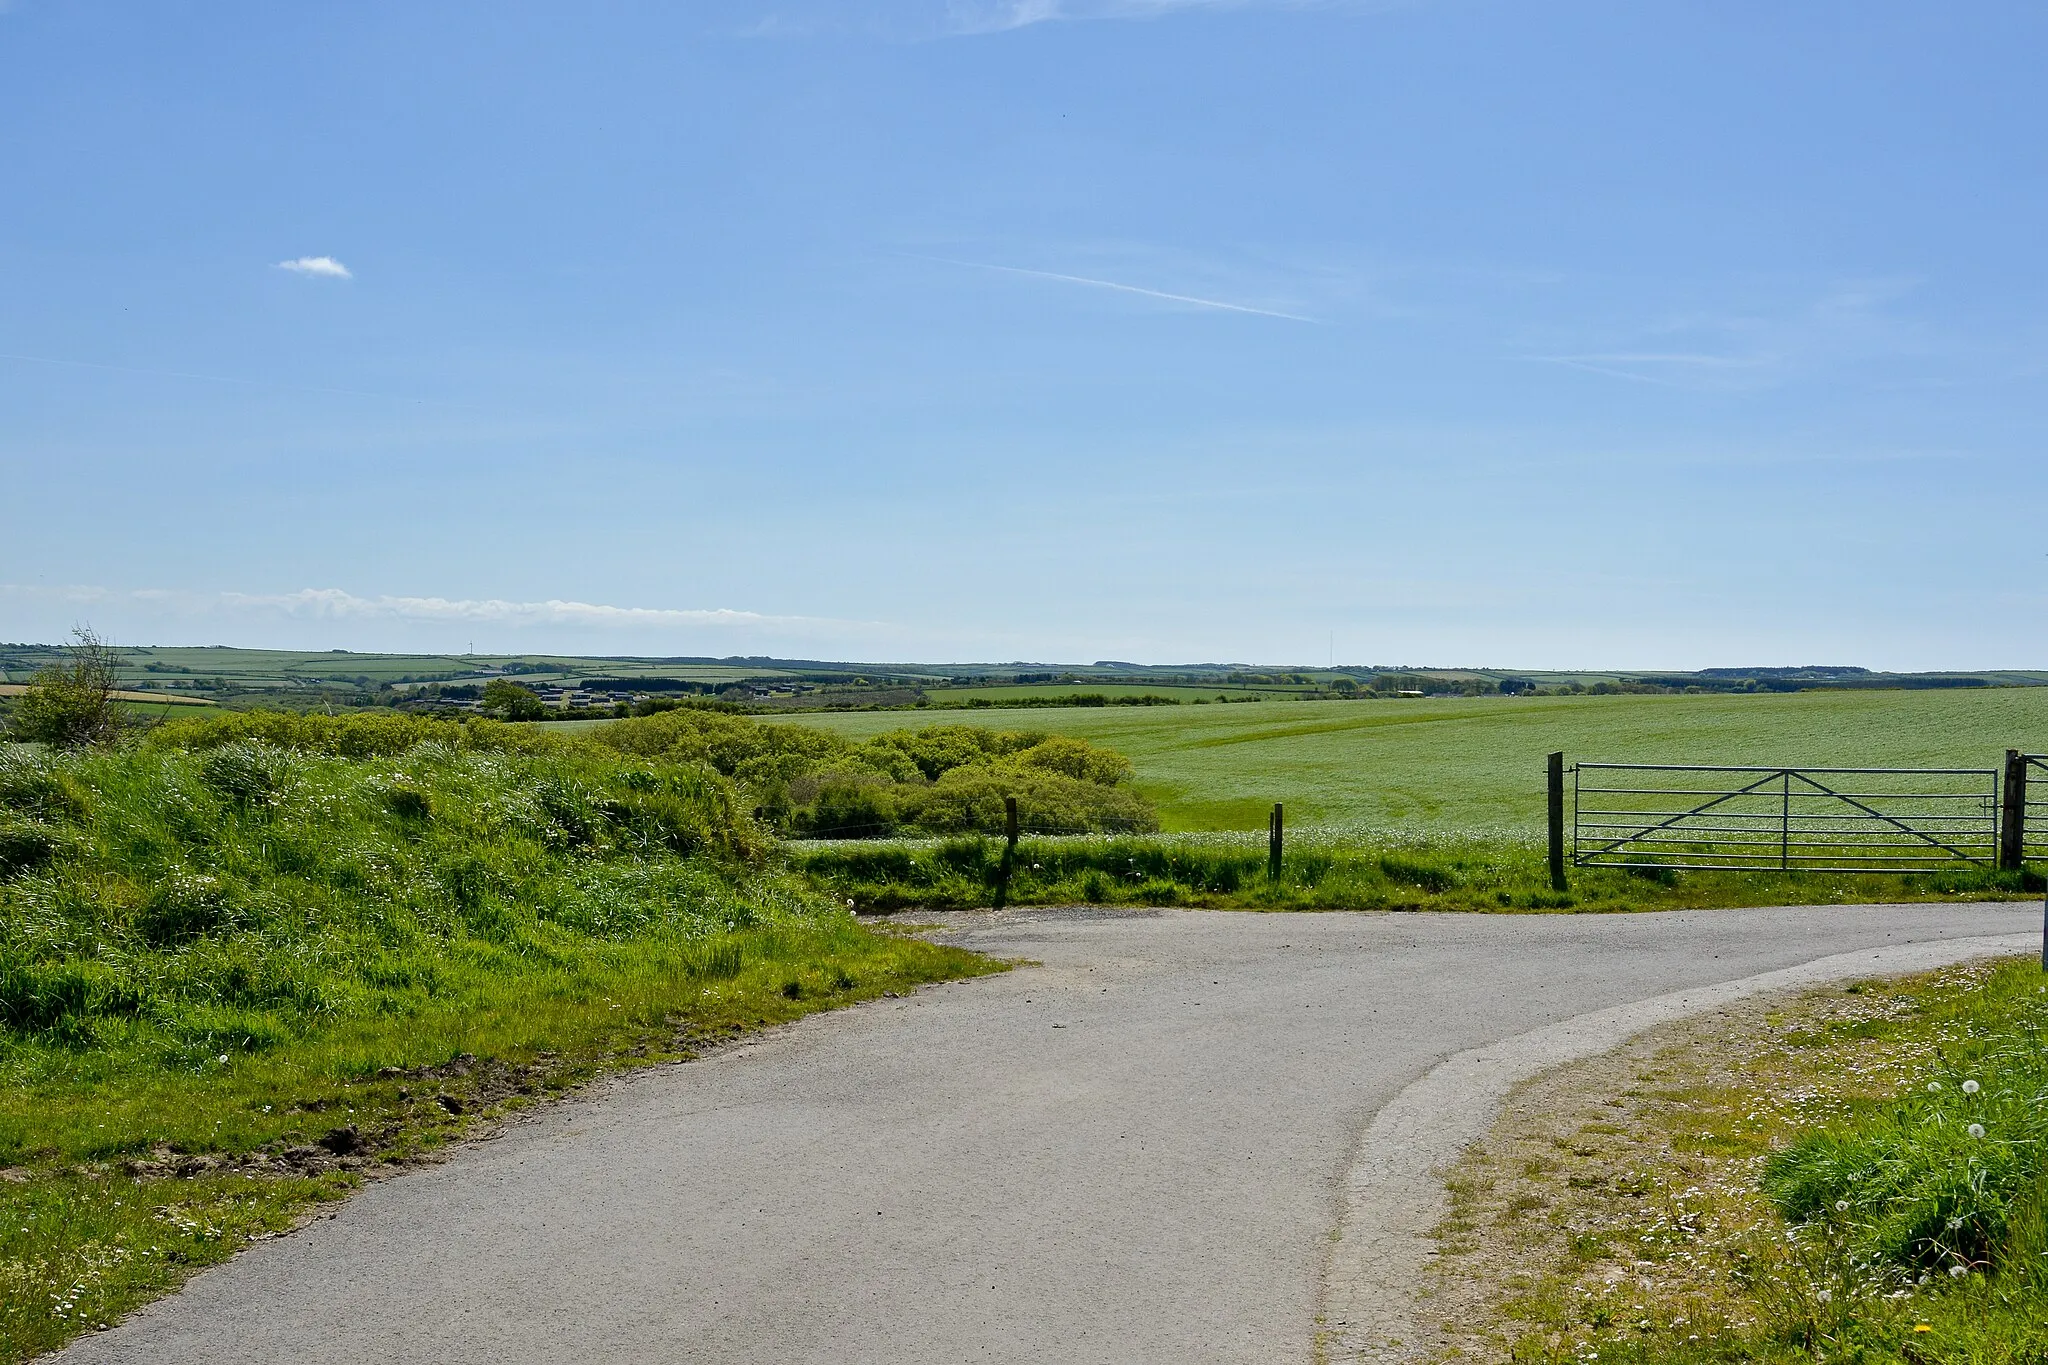 Photo showing: The view towards Meddon from a road near Trew Farm